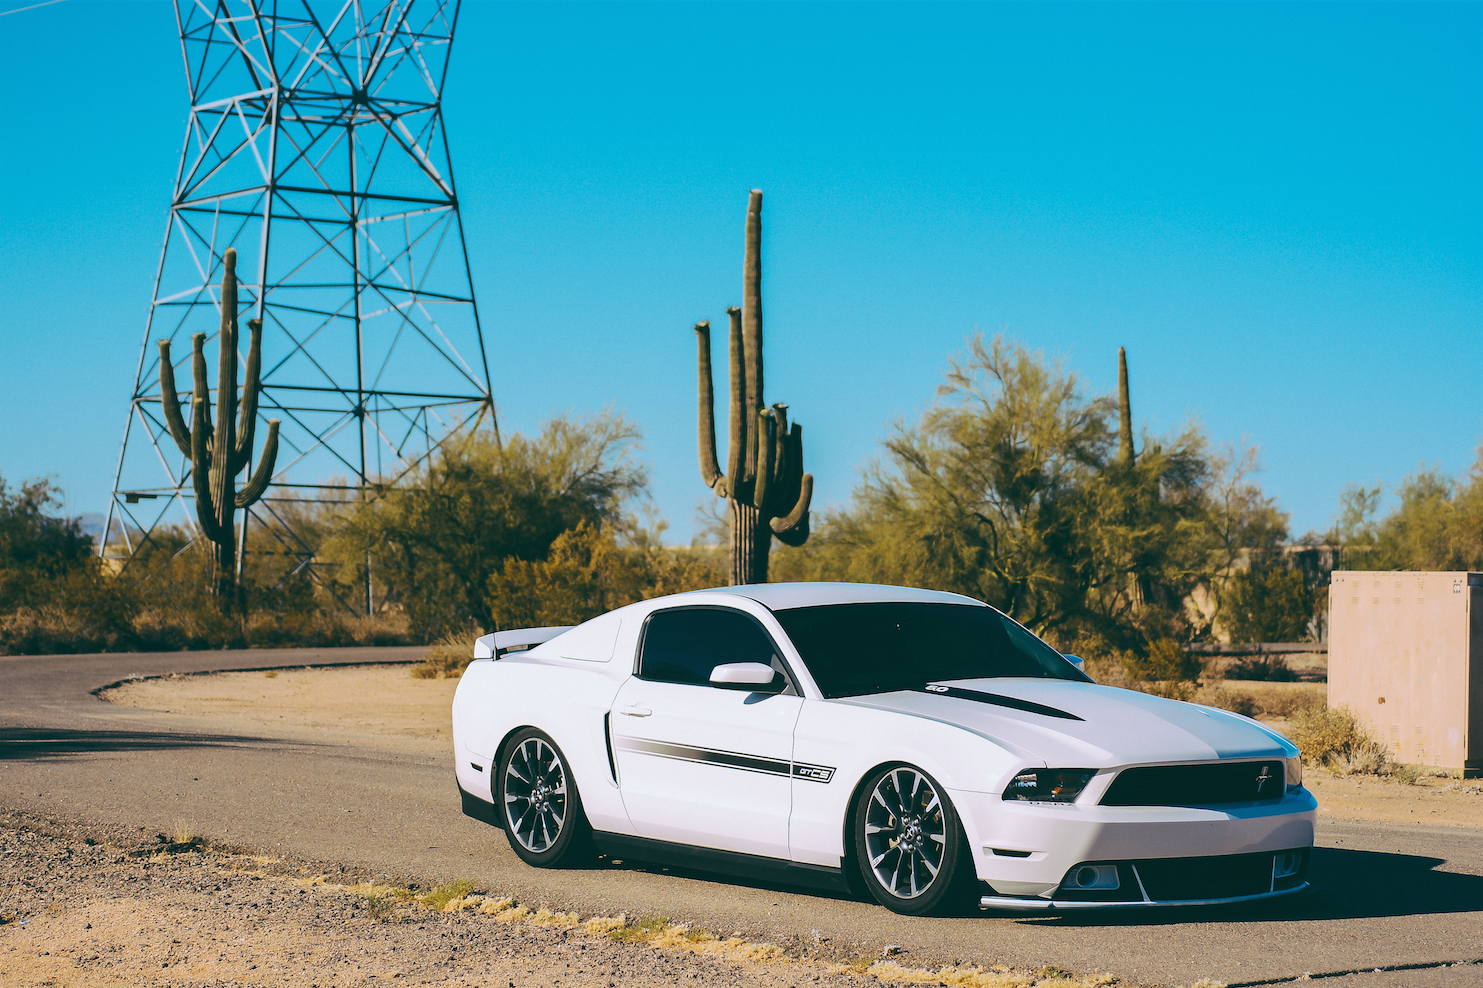 Photo by Jonathan Daniels - 2012 Ford Mustang